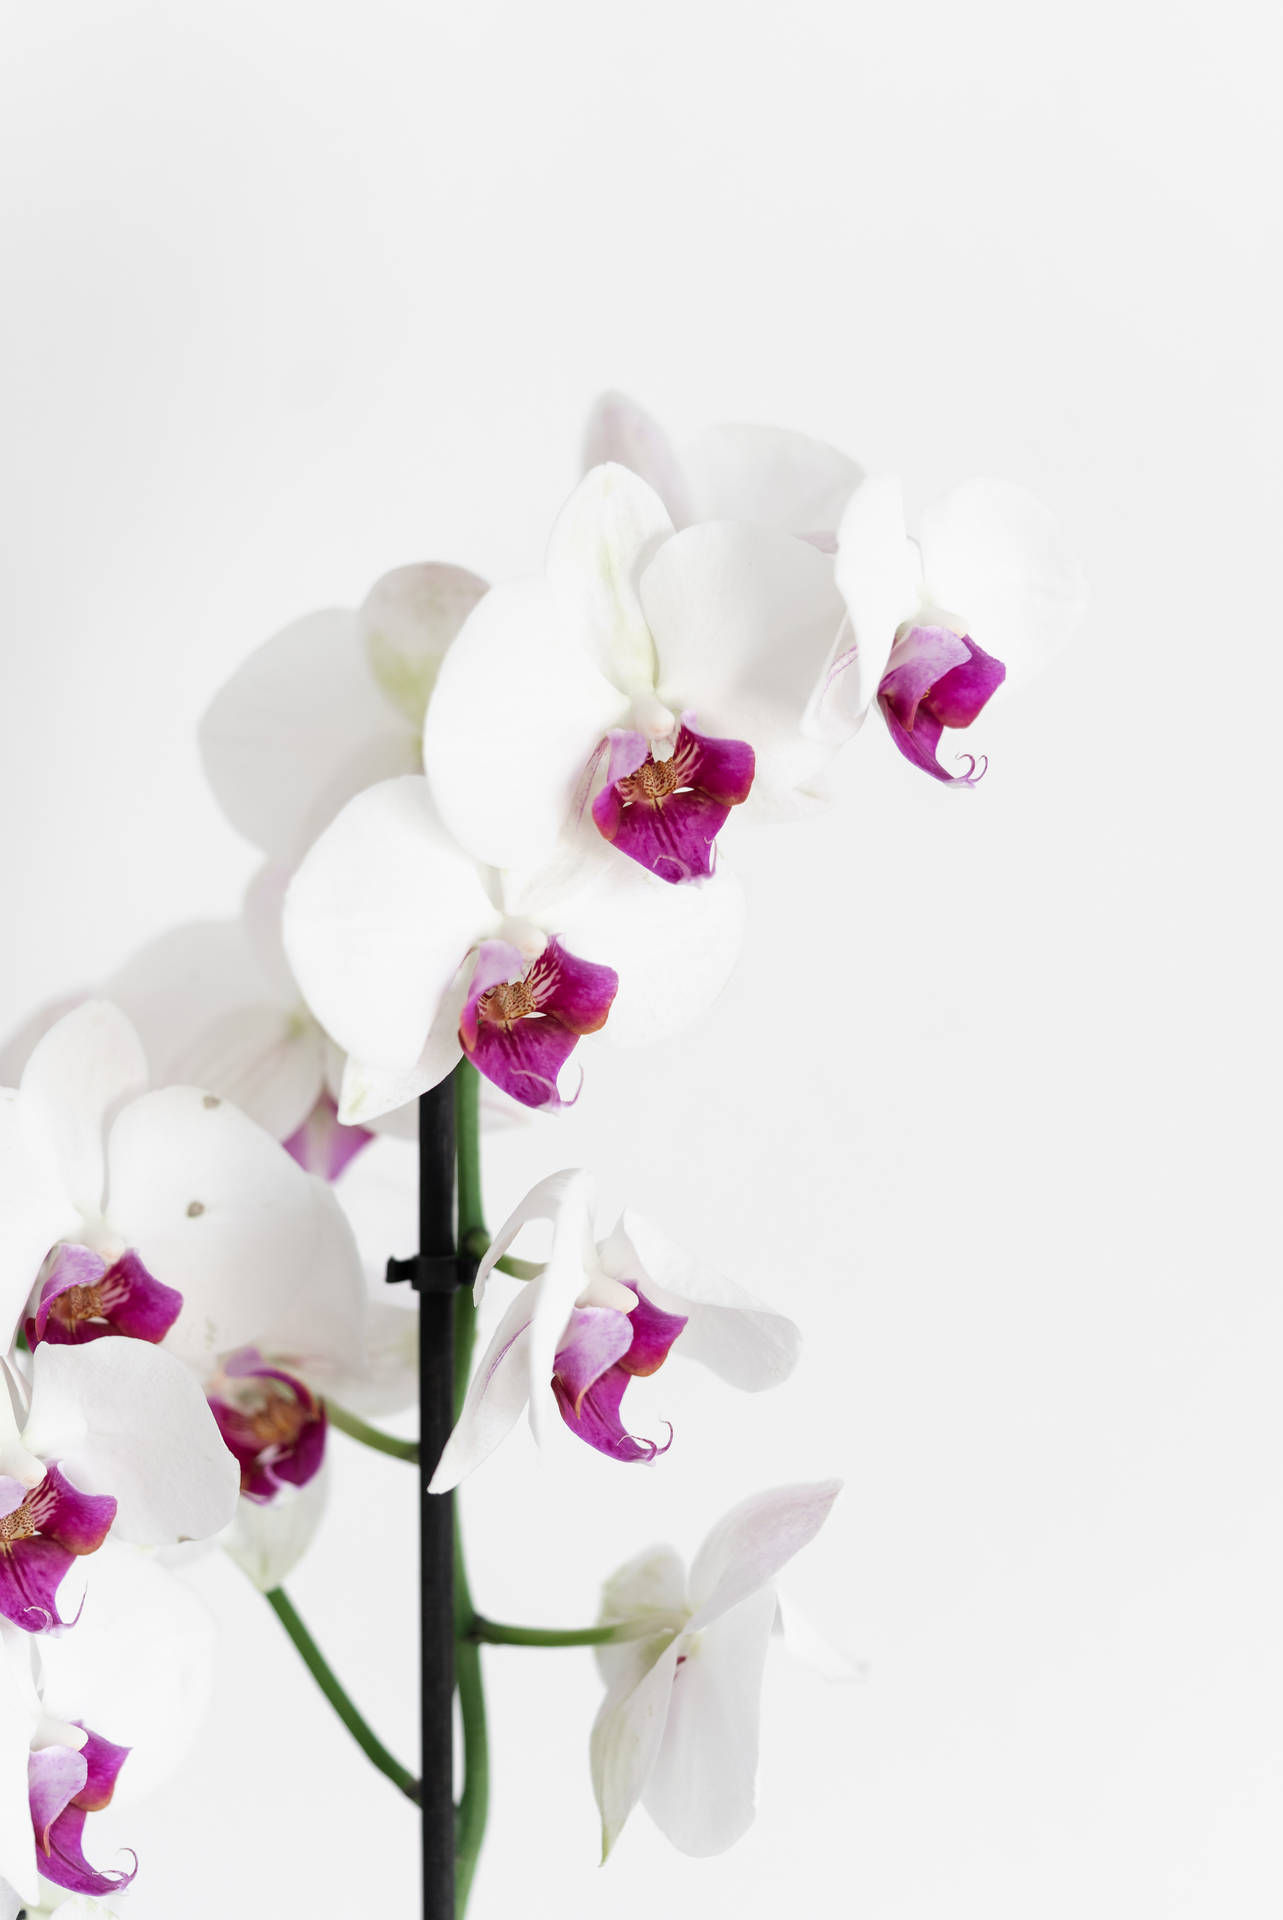 Phalaenopsis Aphrodite Orchid Flower Android Background